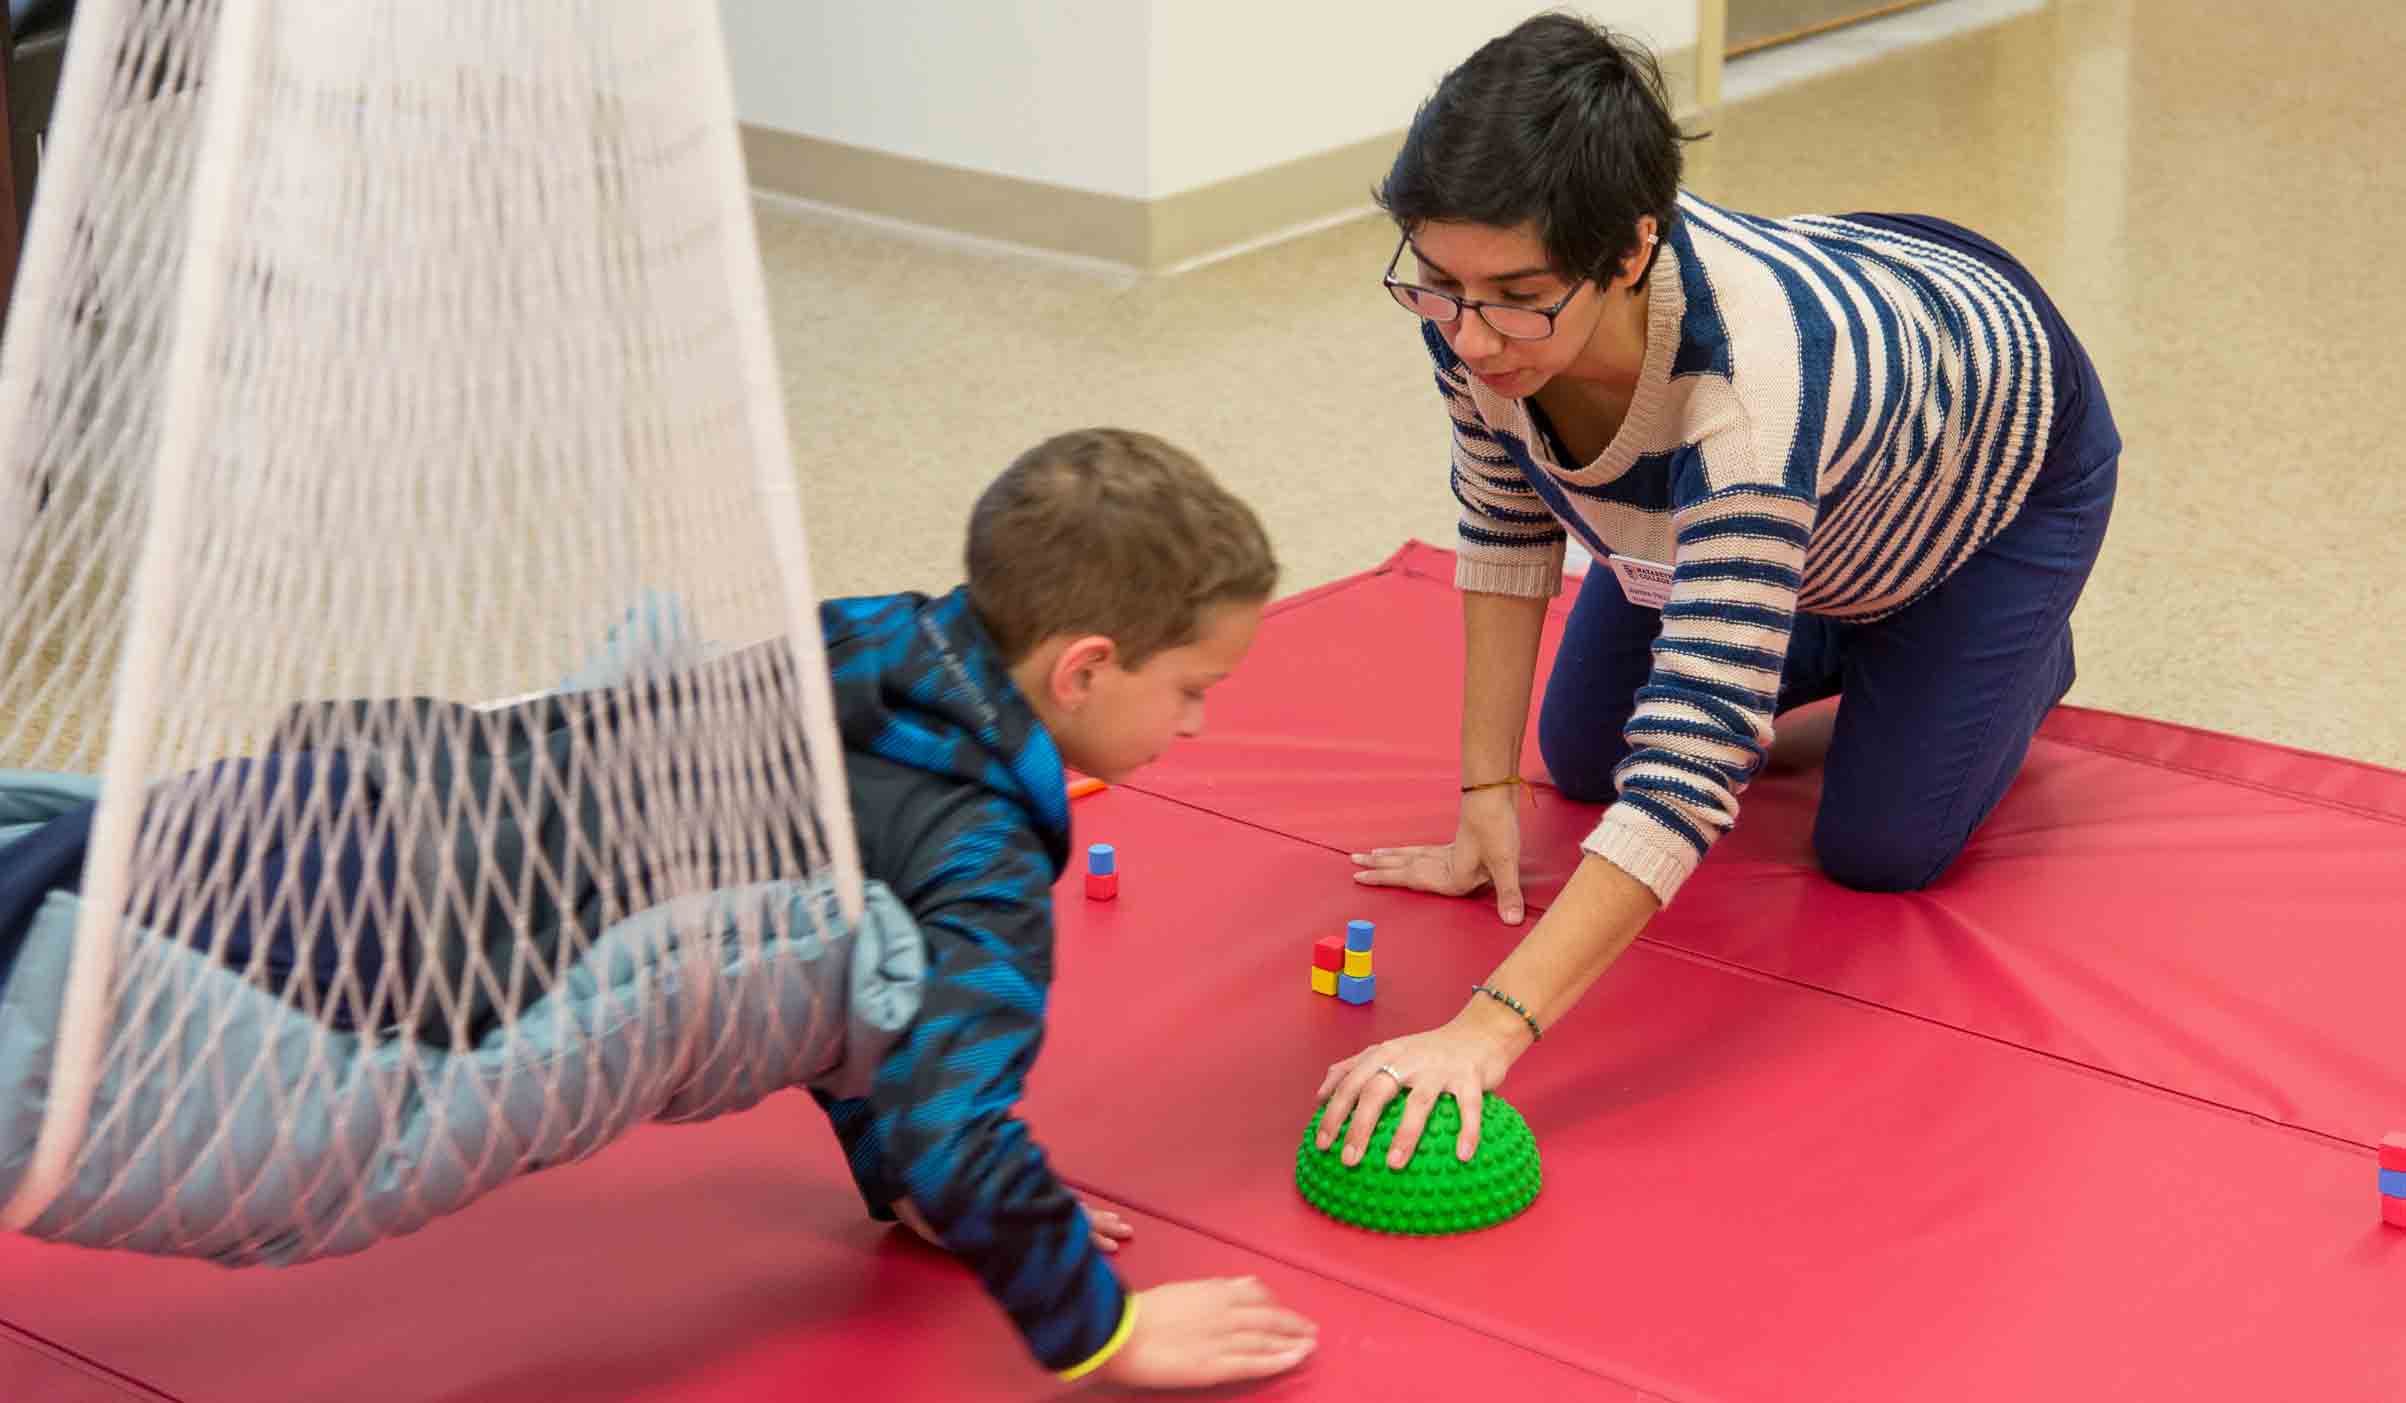 Contact otclinic@naz.edu Child and student work in Occupational Therapy clinic